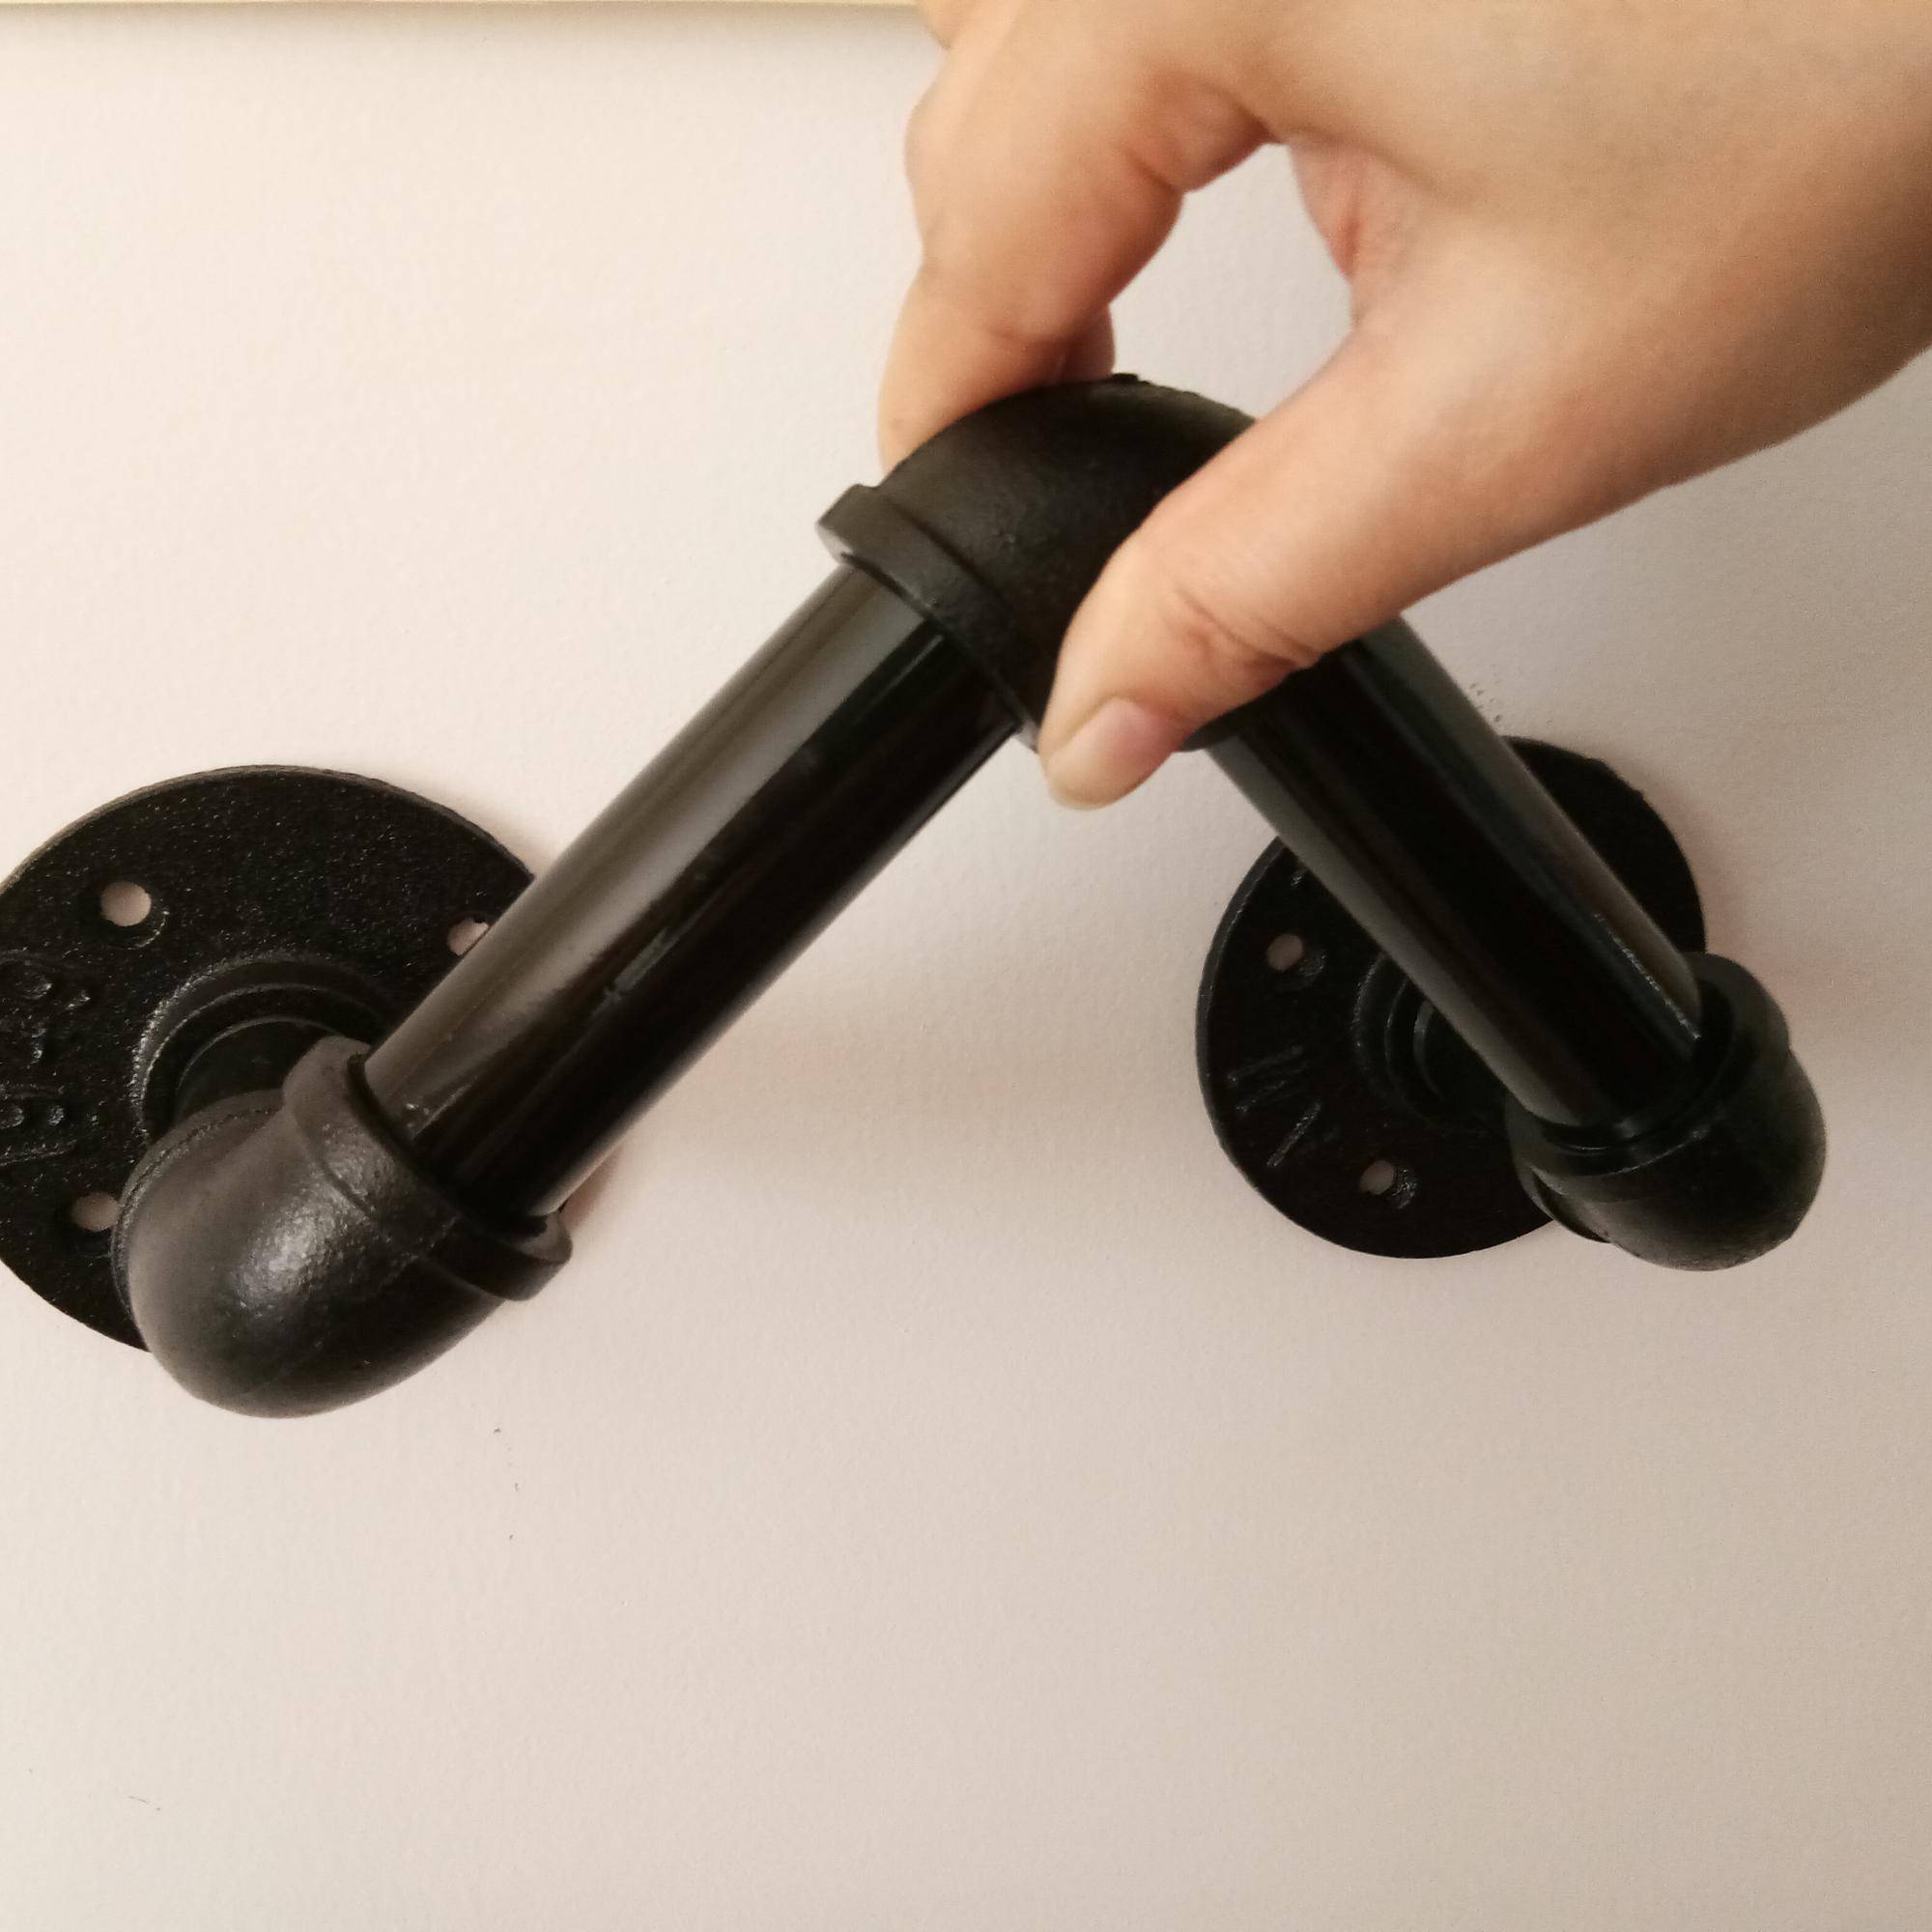 Iron elbow used in DIY furniture fitting bend